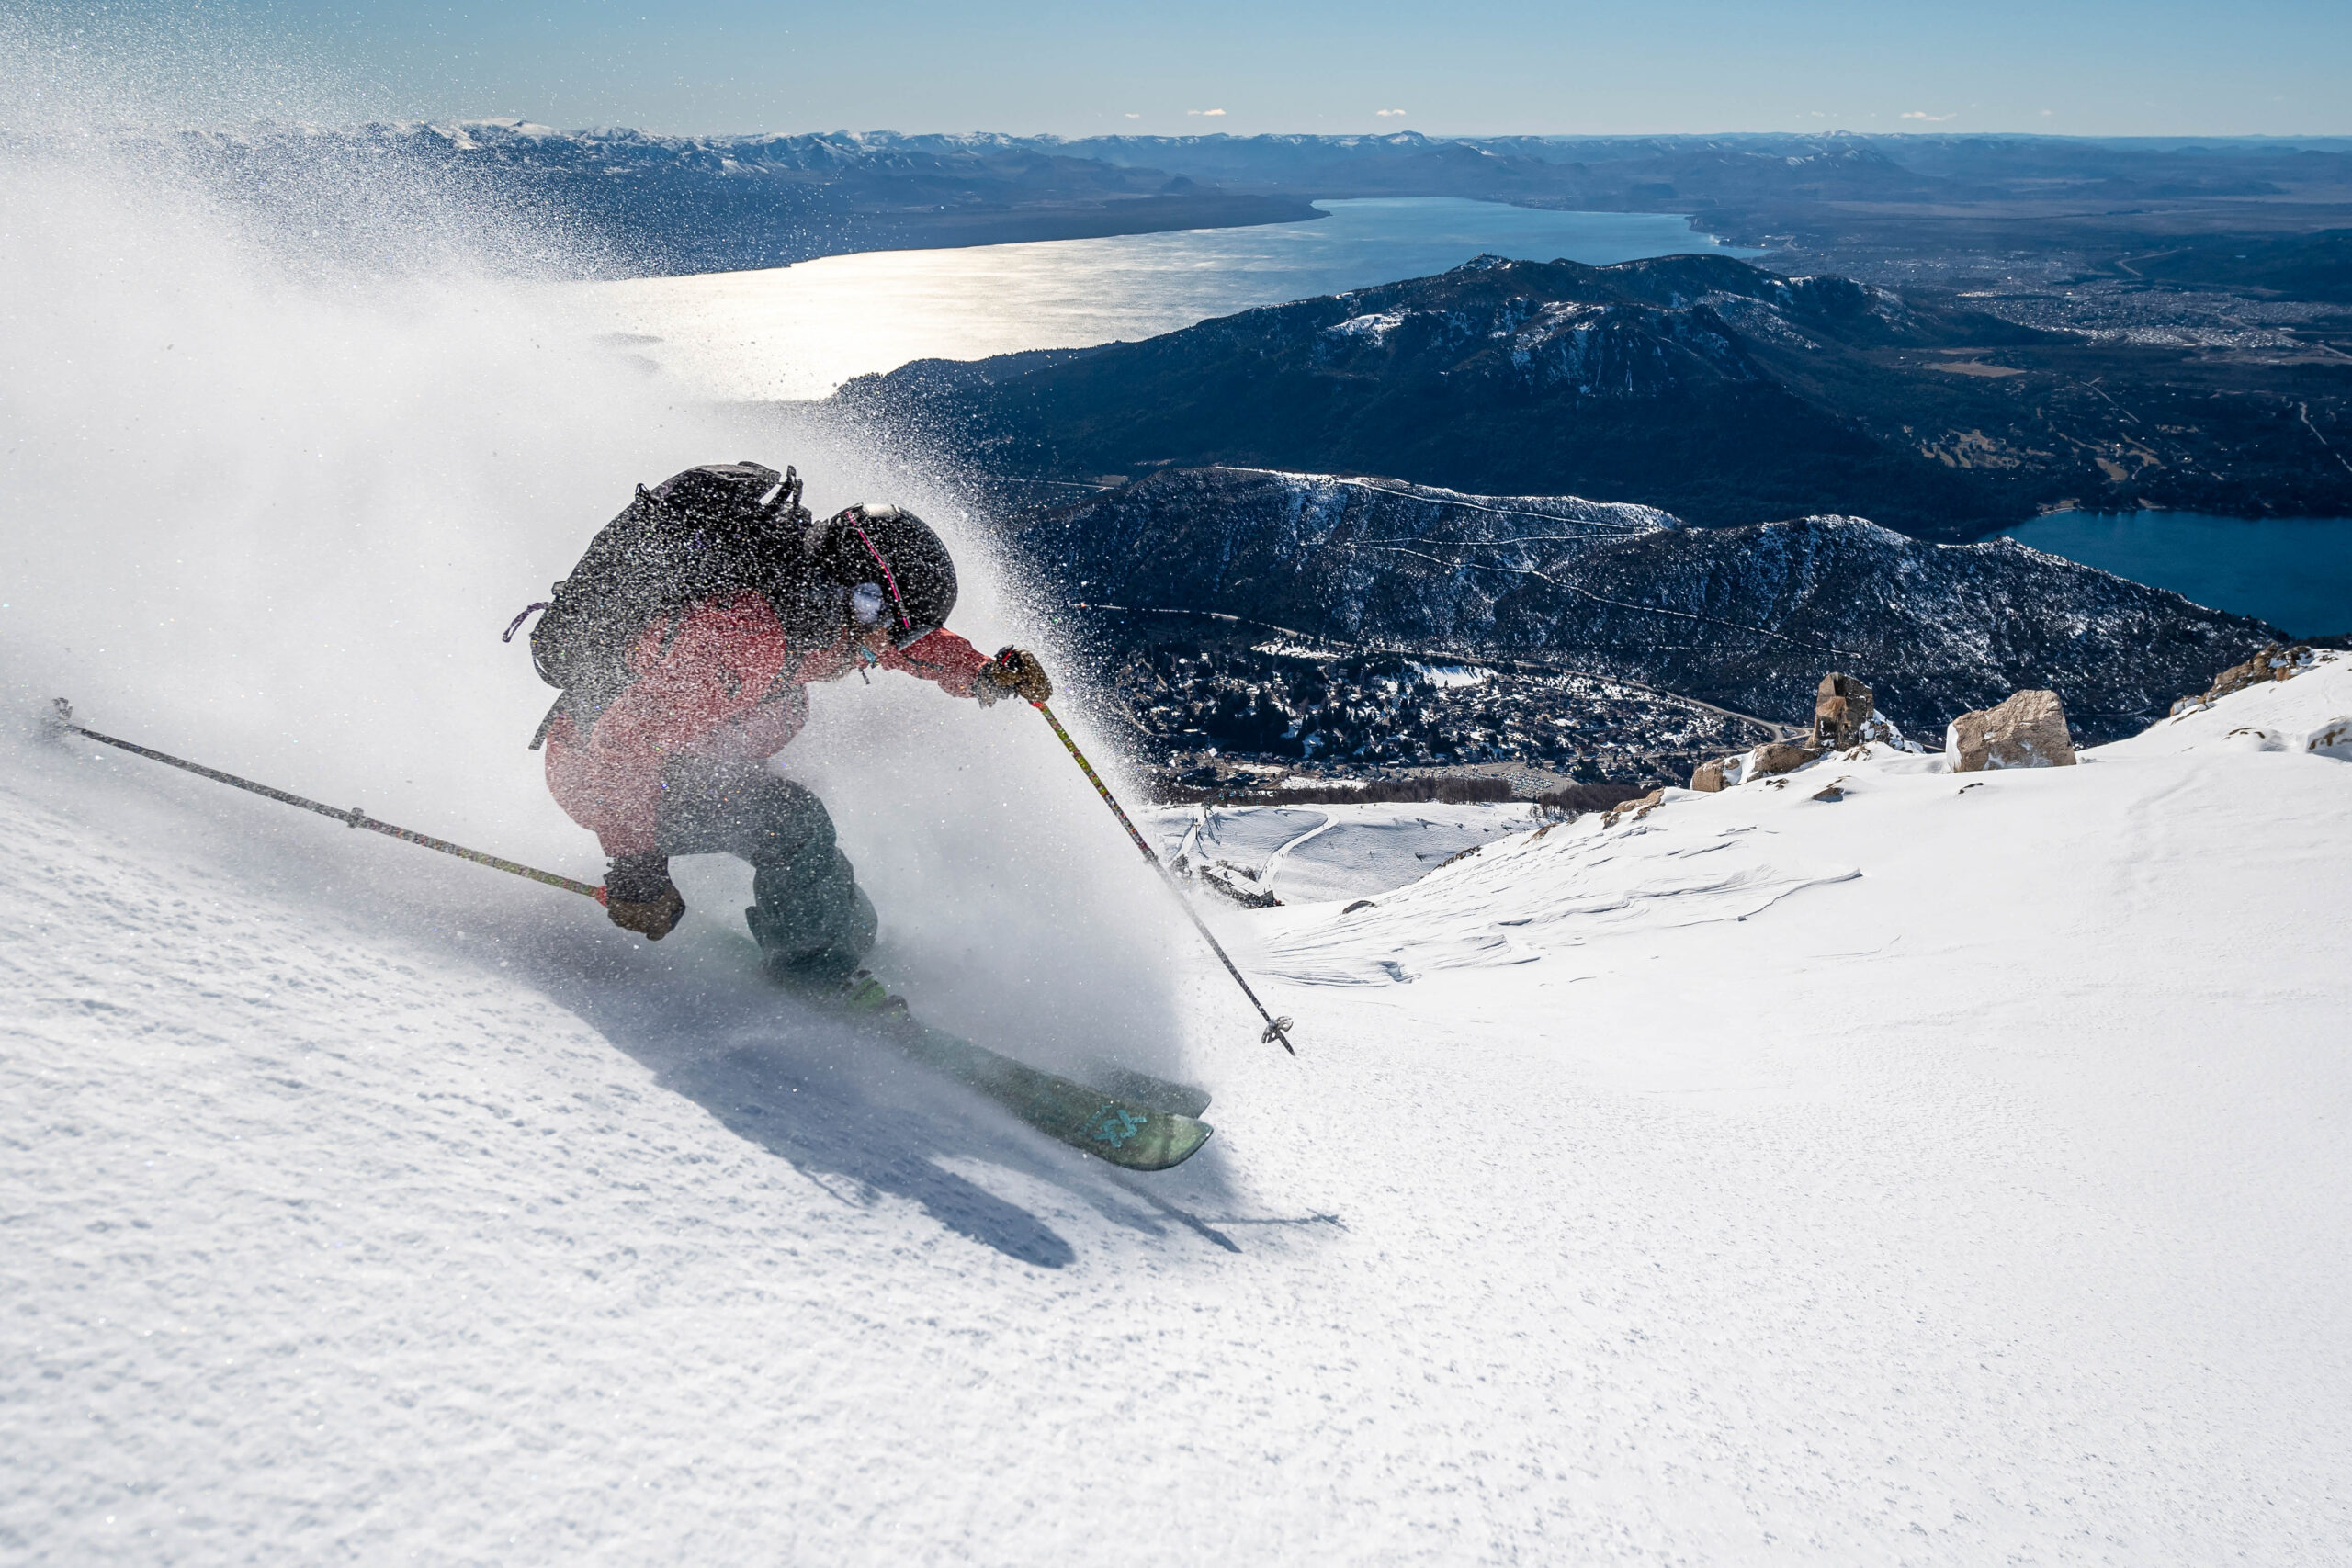 A snowless valley and lake is visible in the distance, whilst a skier (Ingrid Backstrom) makes a turn in light virgin powder